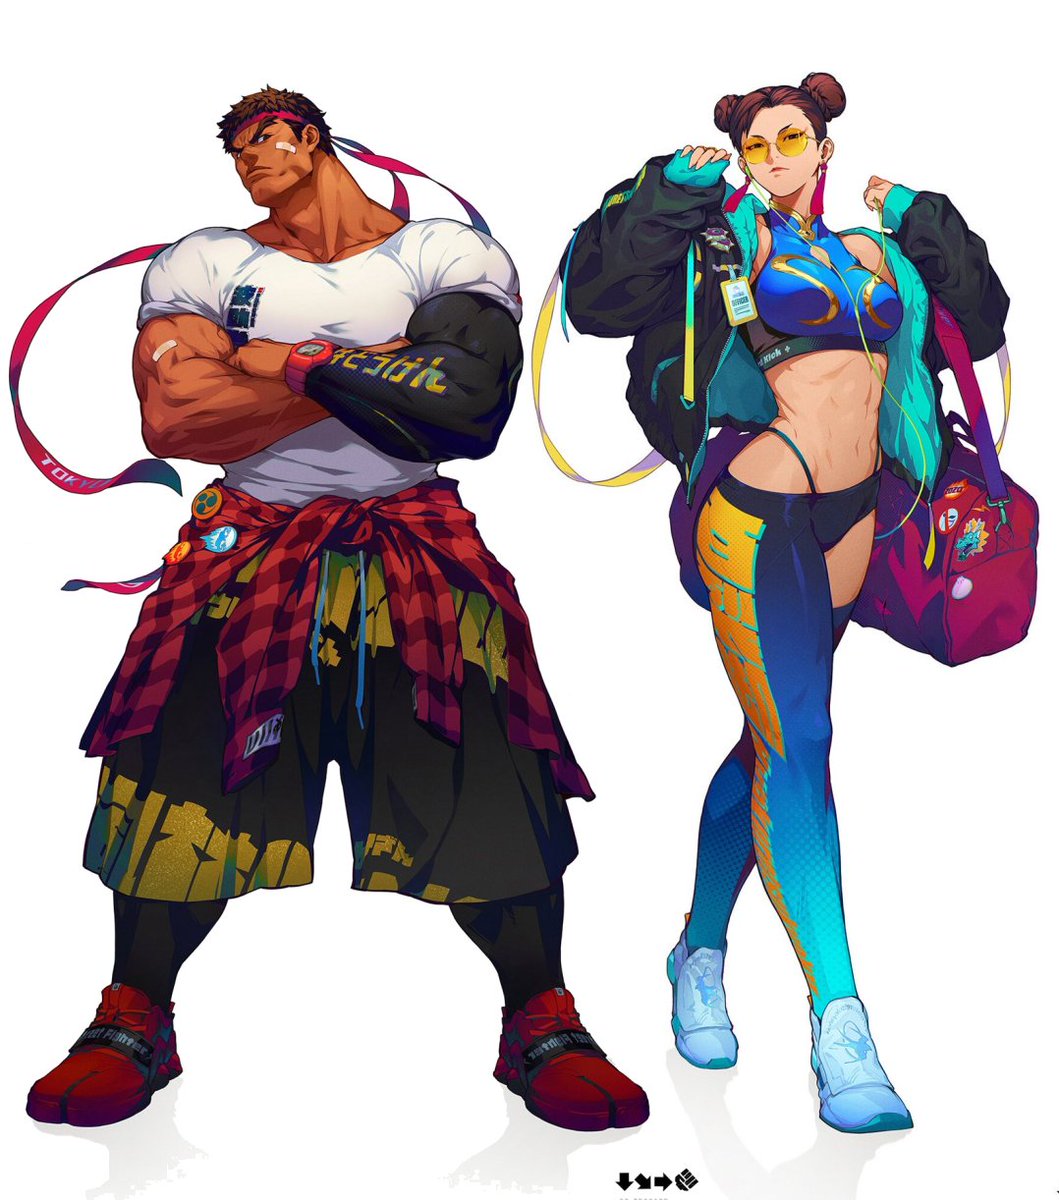 New Street Fighter: Duel official character artwork by Xin Wang. 